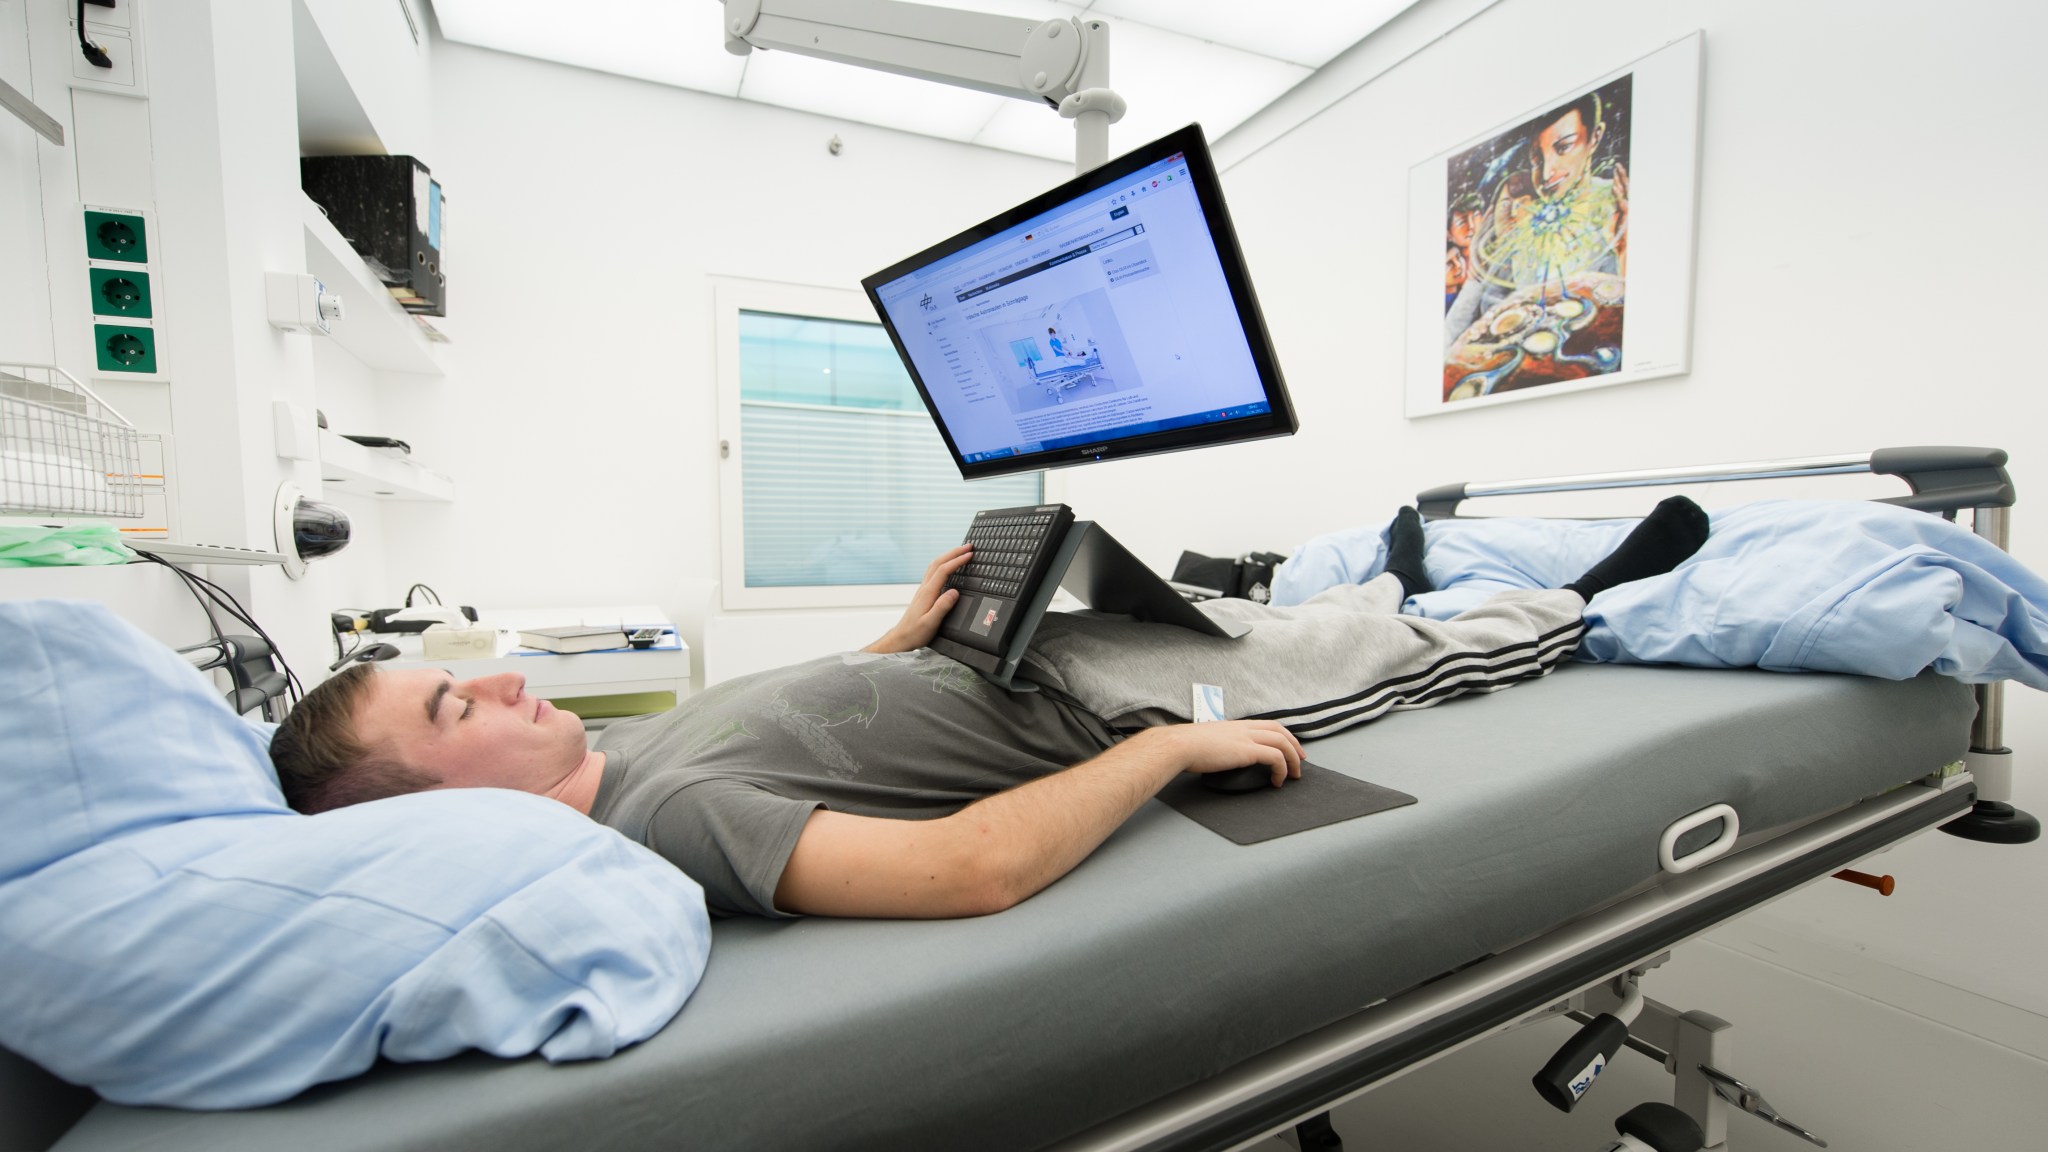 Lying in Bed for the Sake of Science: NASA co-sponsors bed rest study in Germany